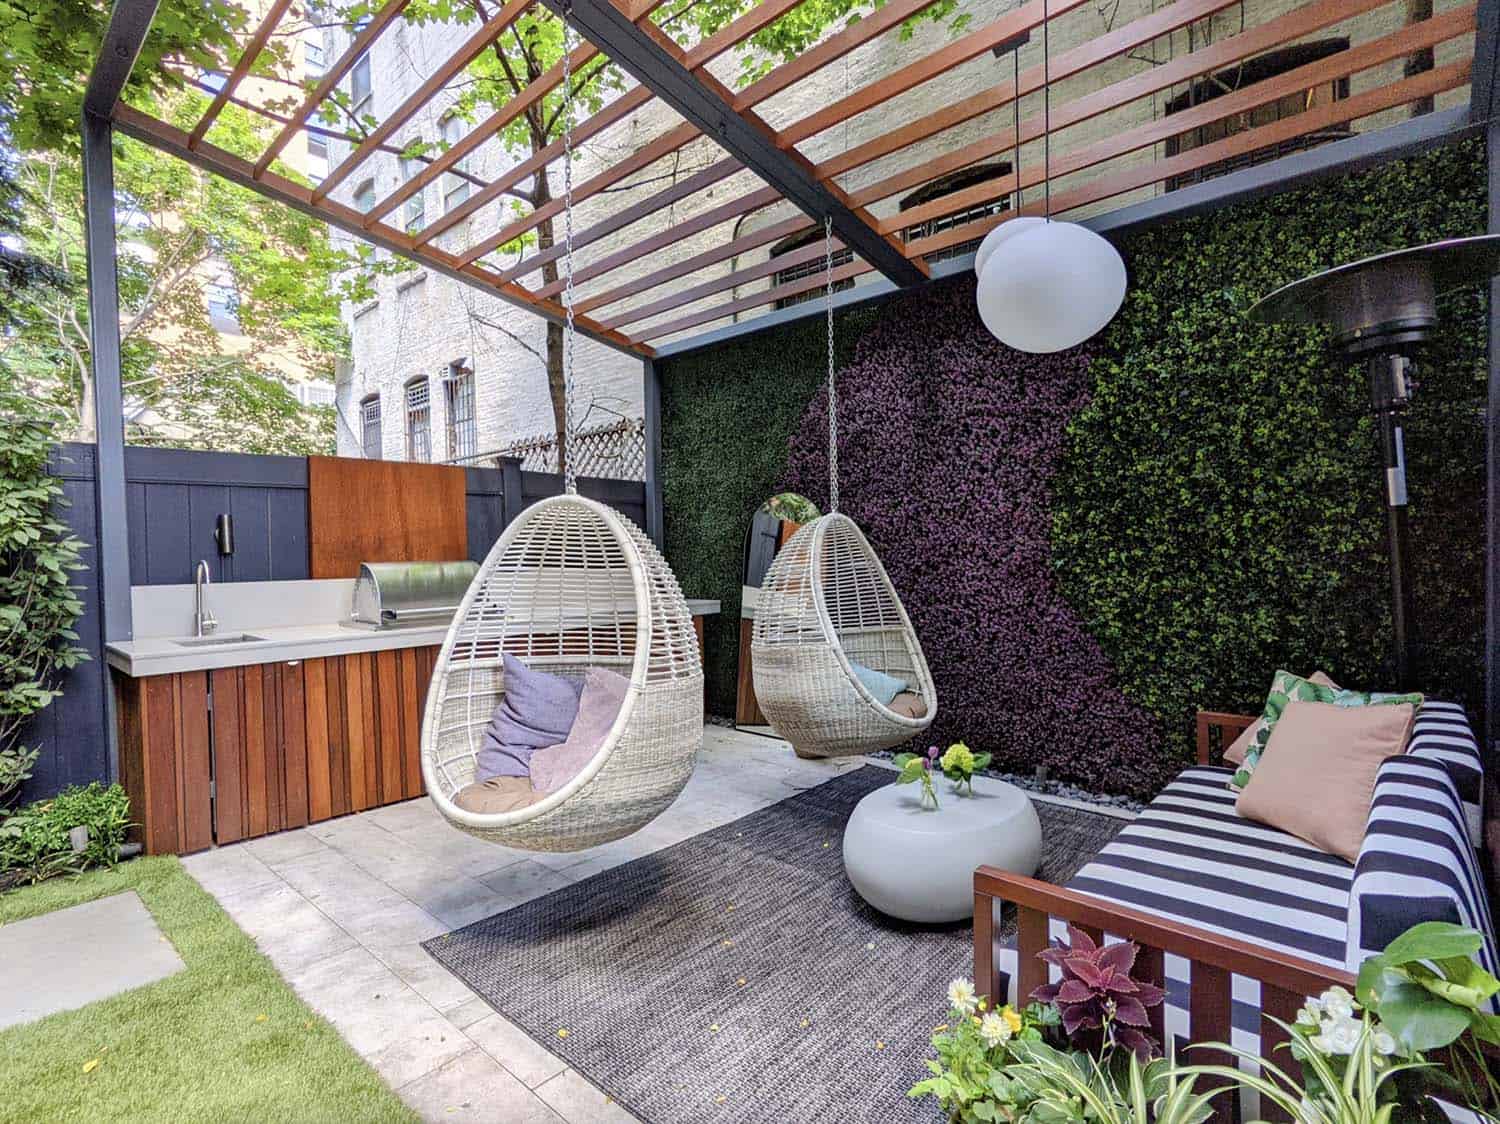 backyard-kitchenette-and-pergola-with-hanging-chairs